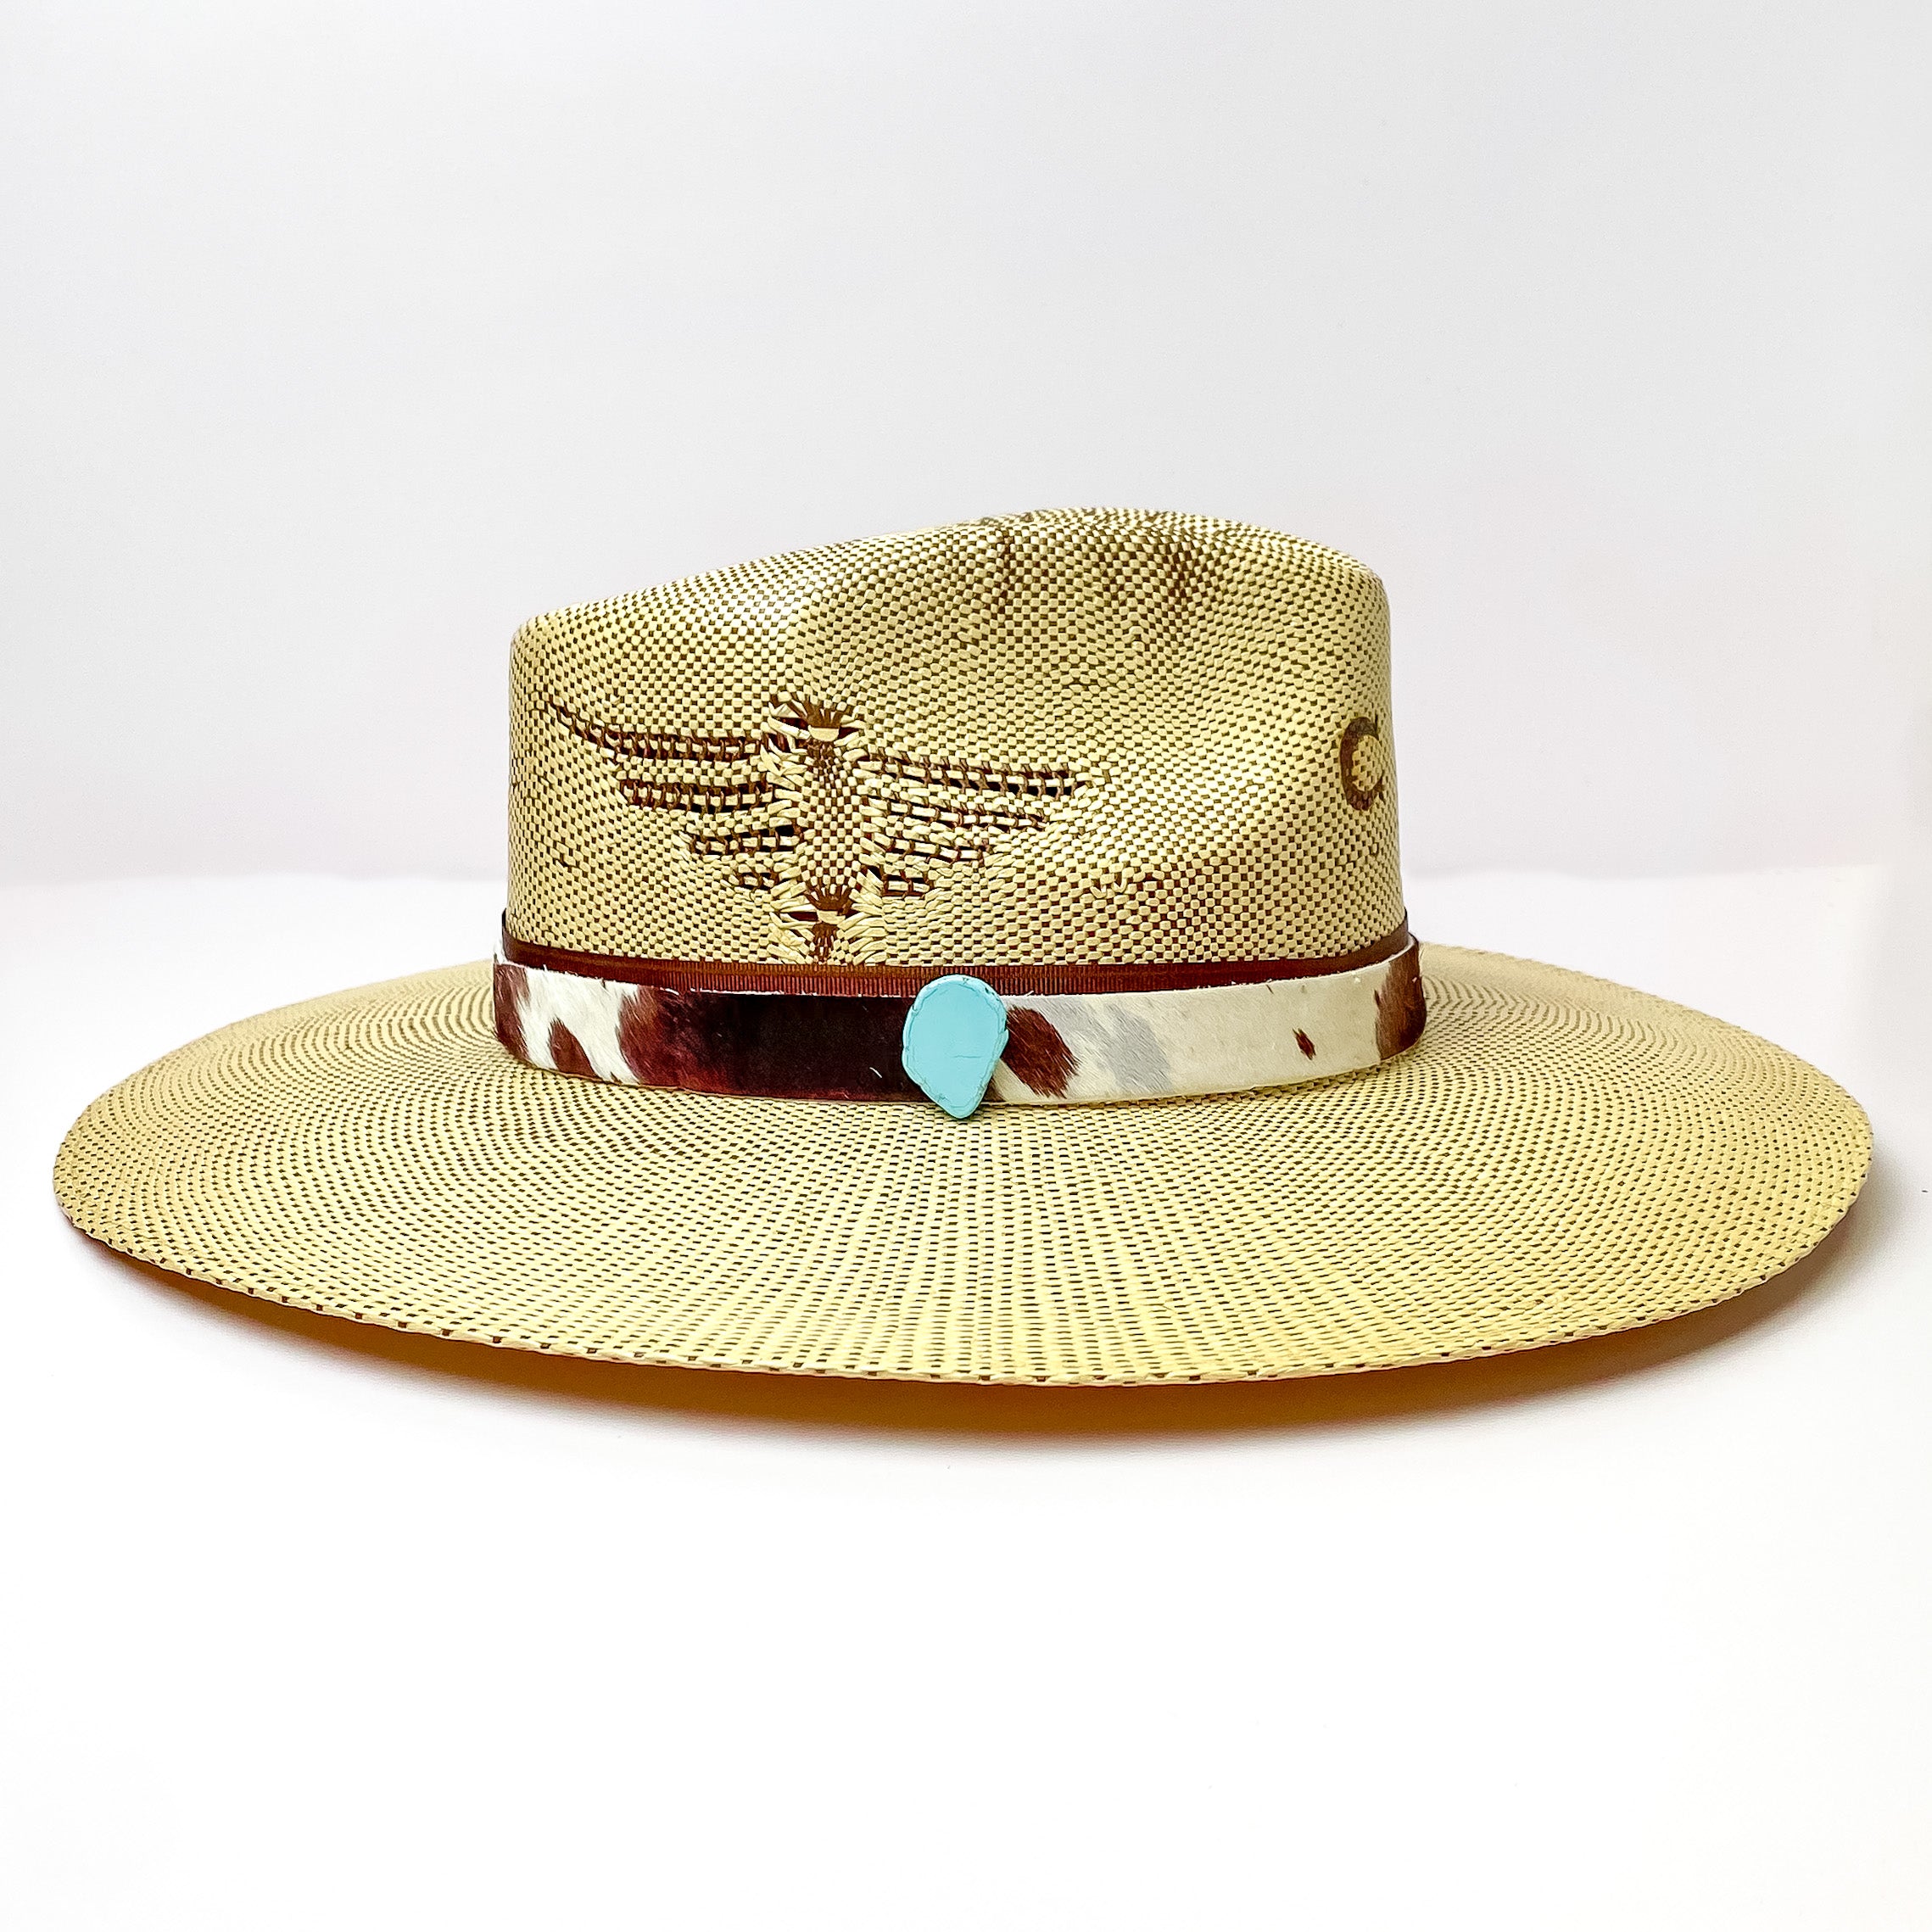 Cow Print Hat Band with Faux Turquoise Charm in Brown, Grey, and White - Giddy Up Glamour Boutique